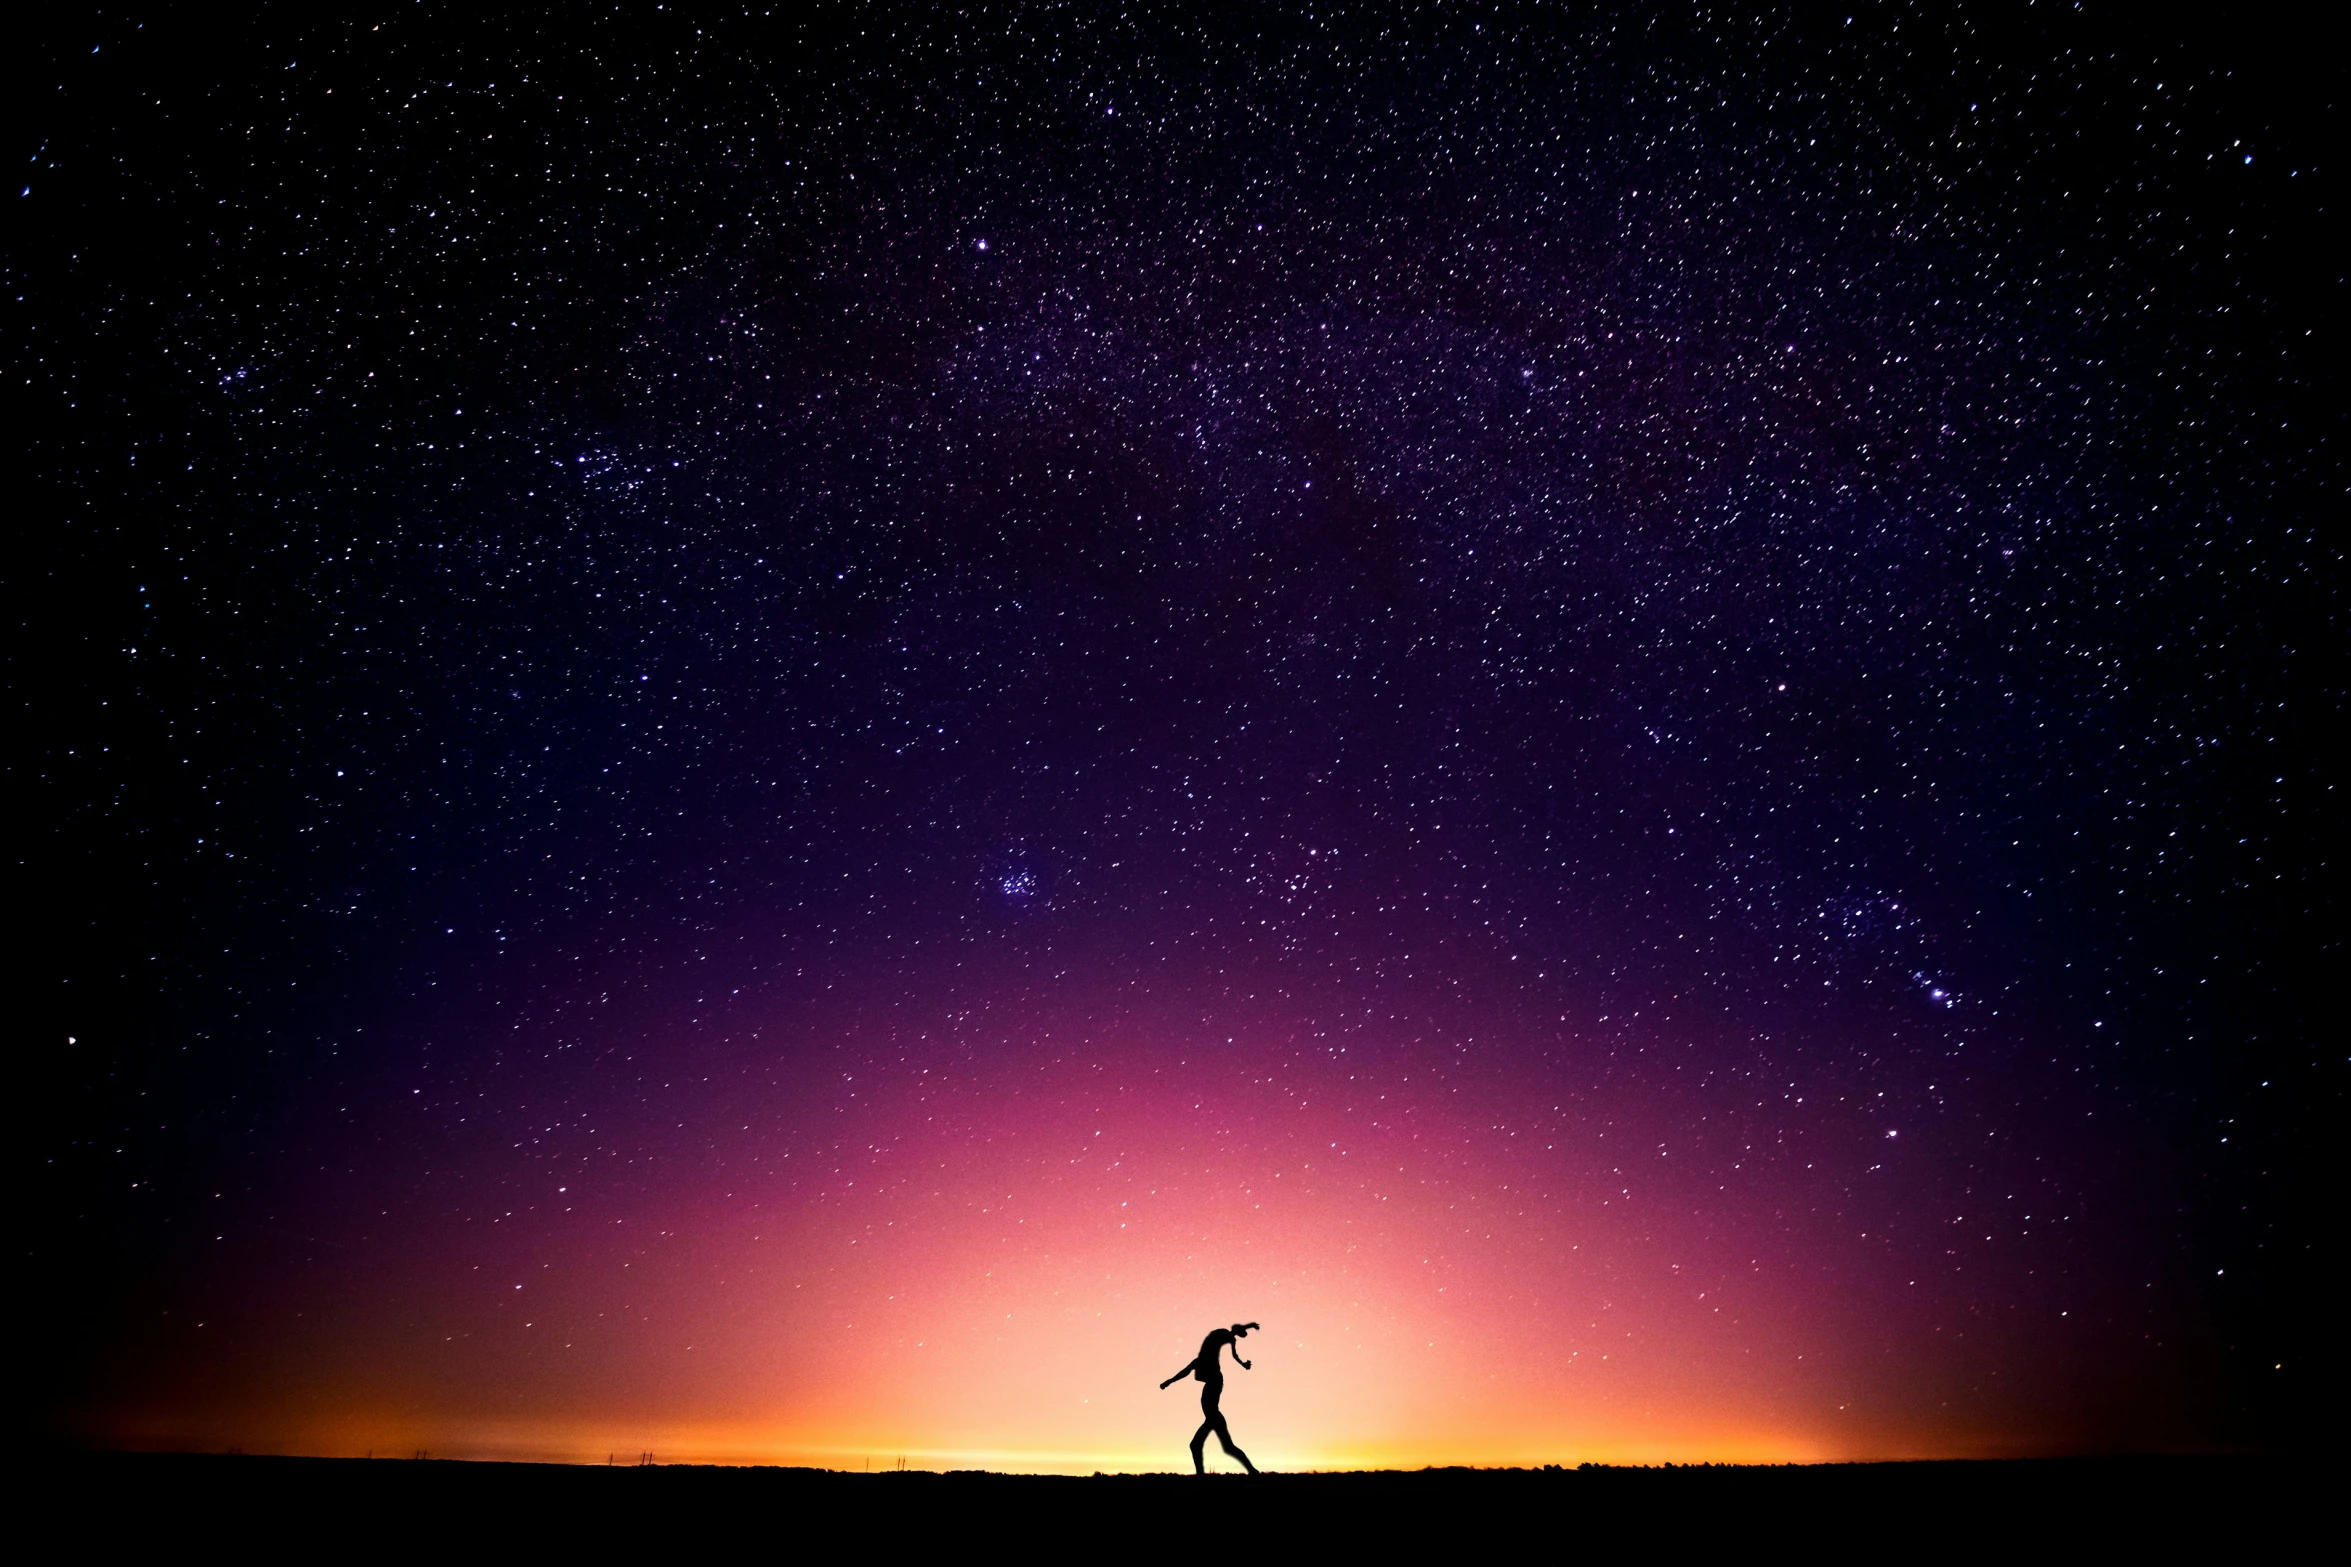 a lone person standing under the stars